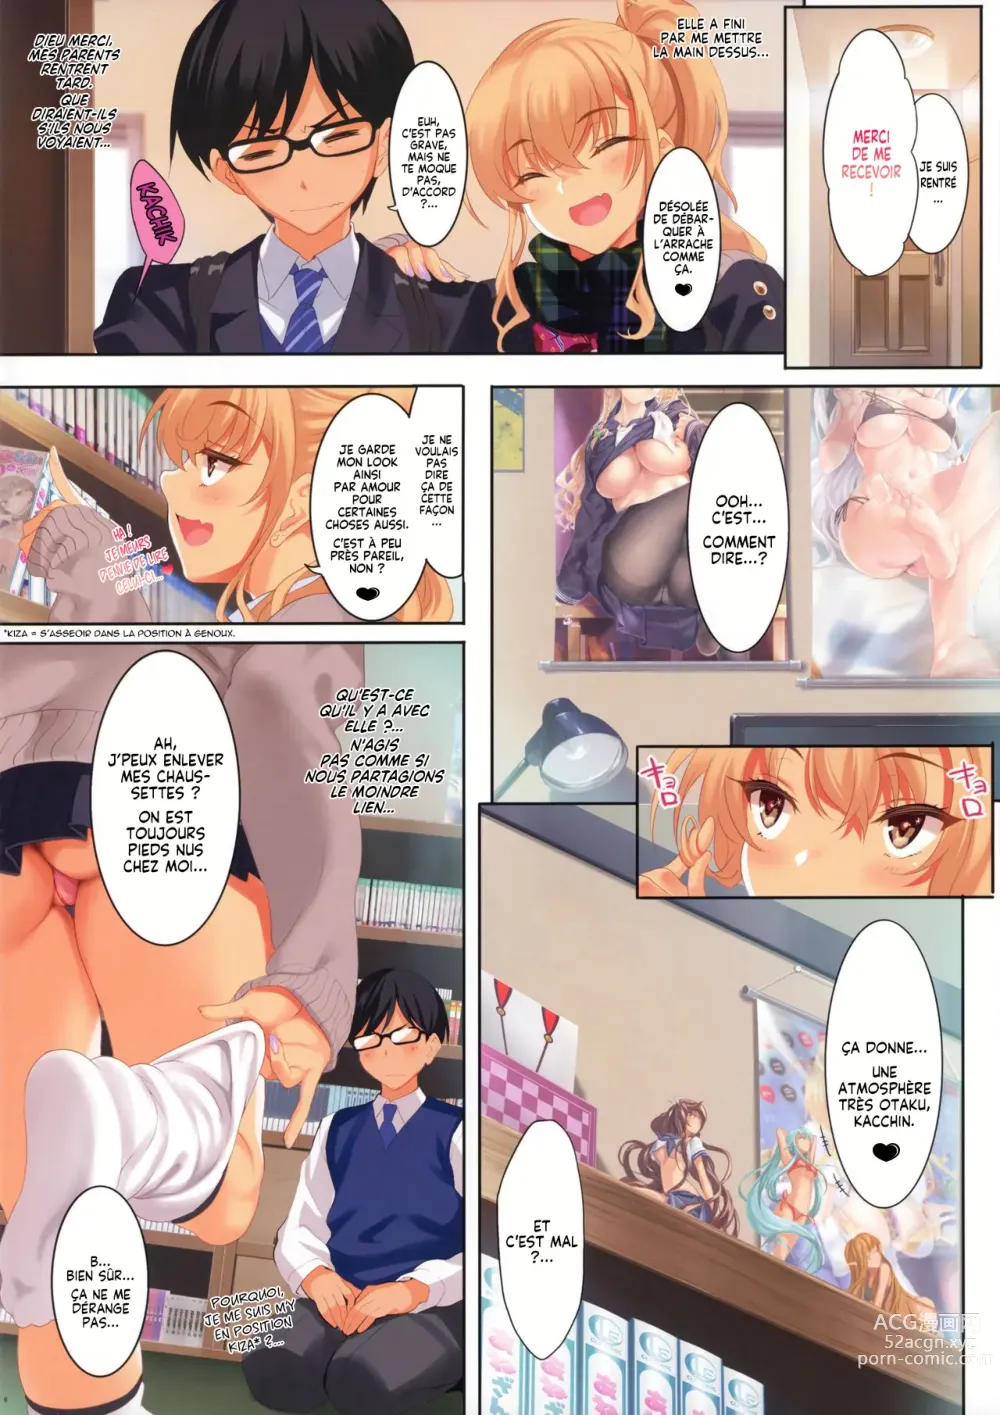 Page 6 of doujinshi Sex Friend (decensored)